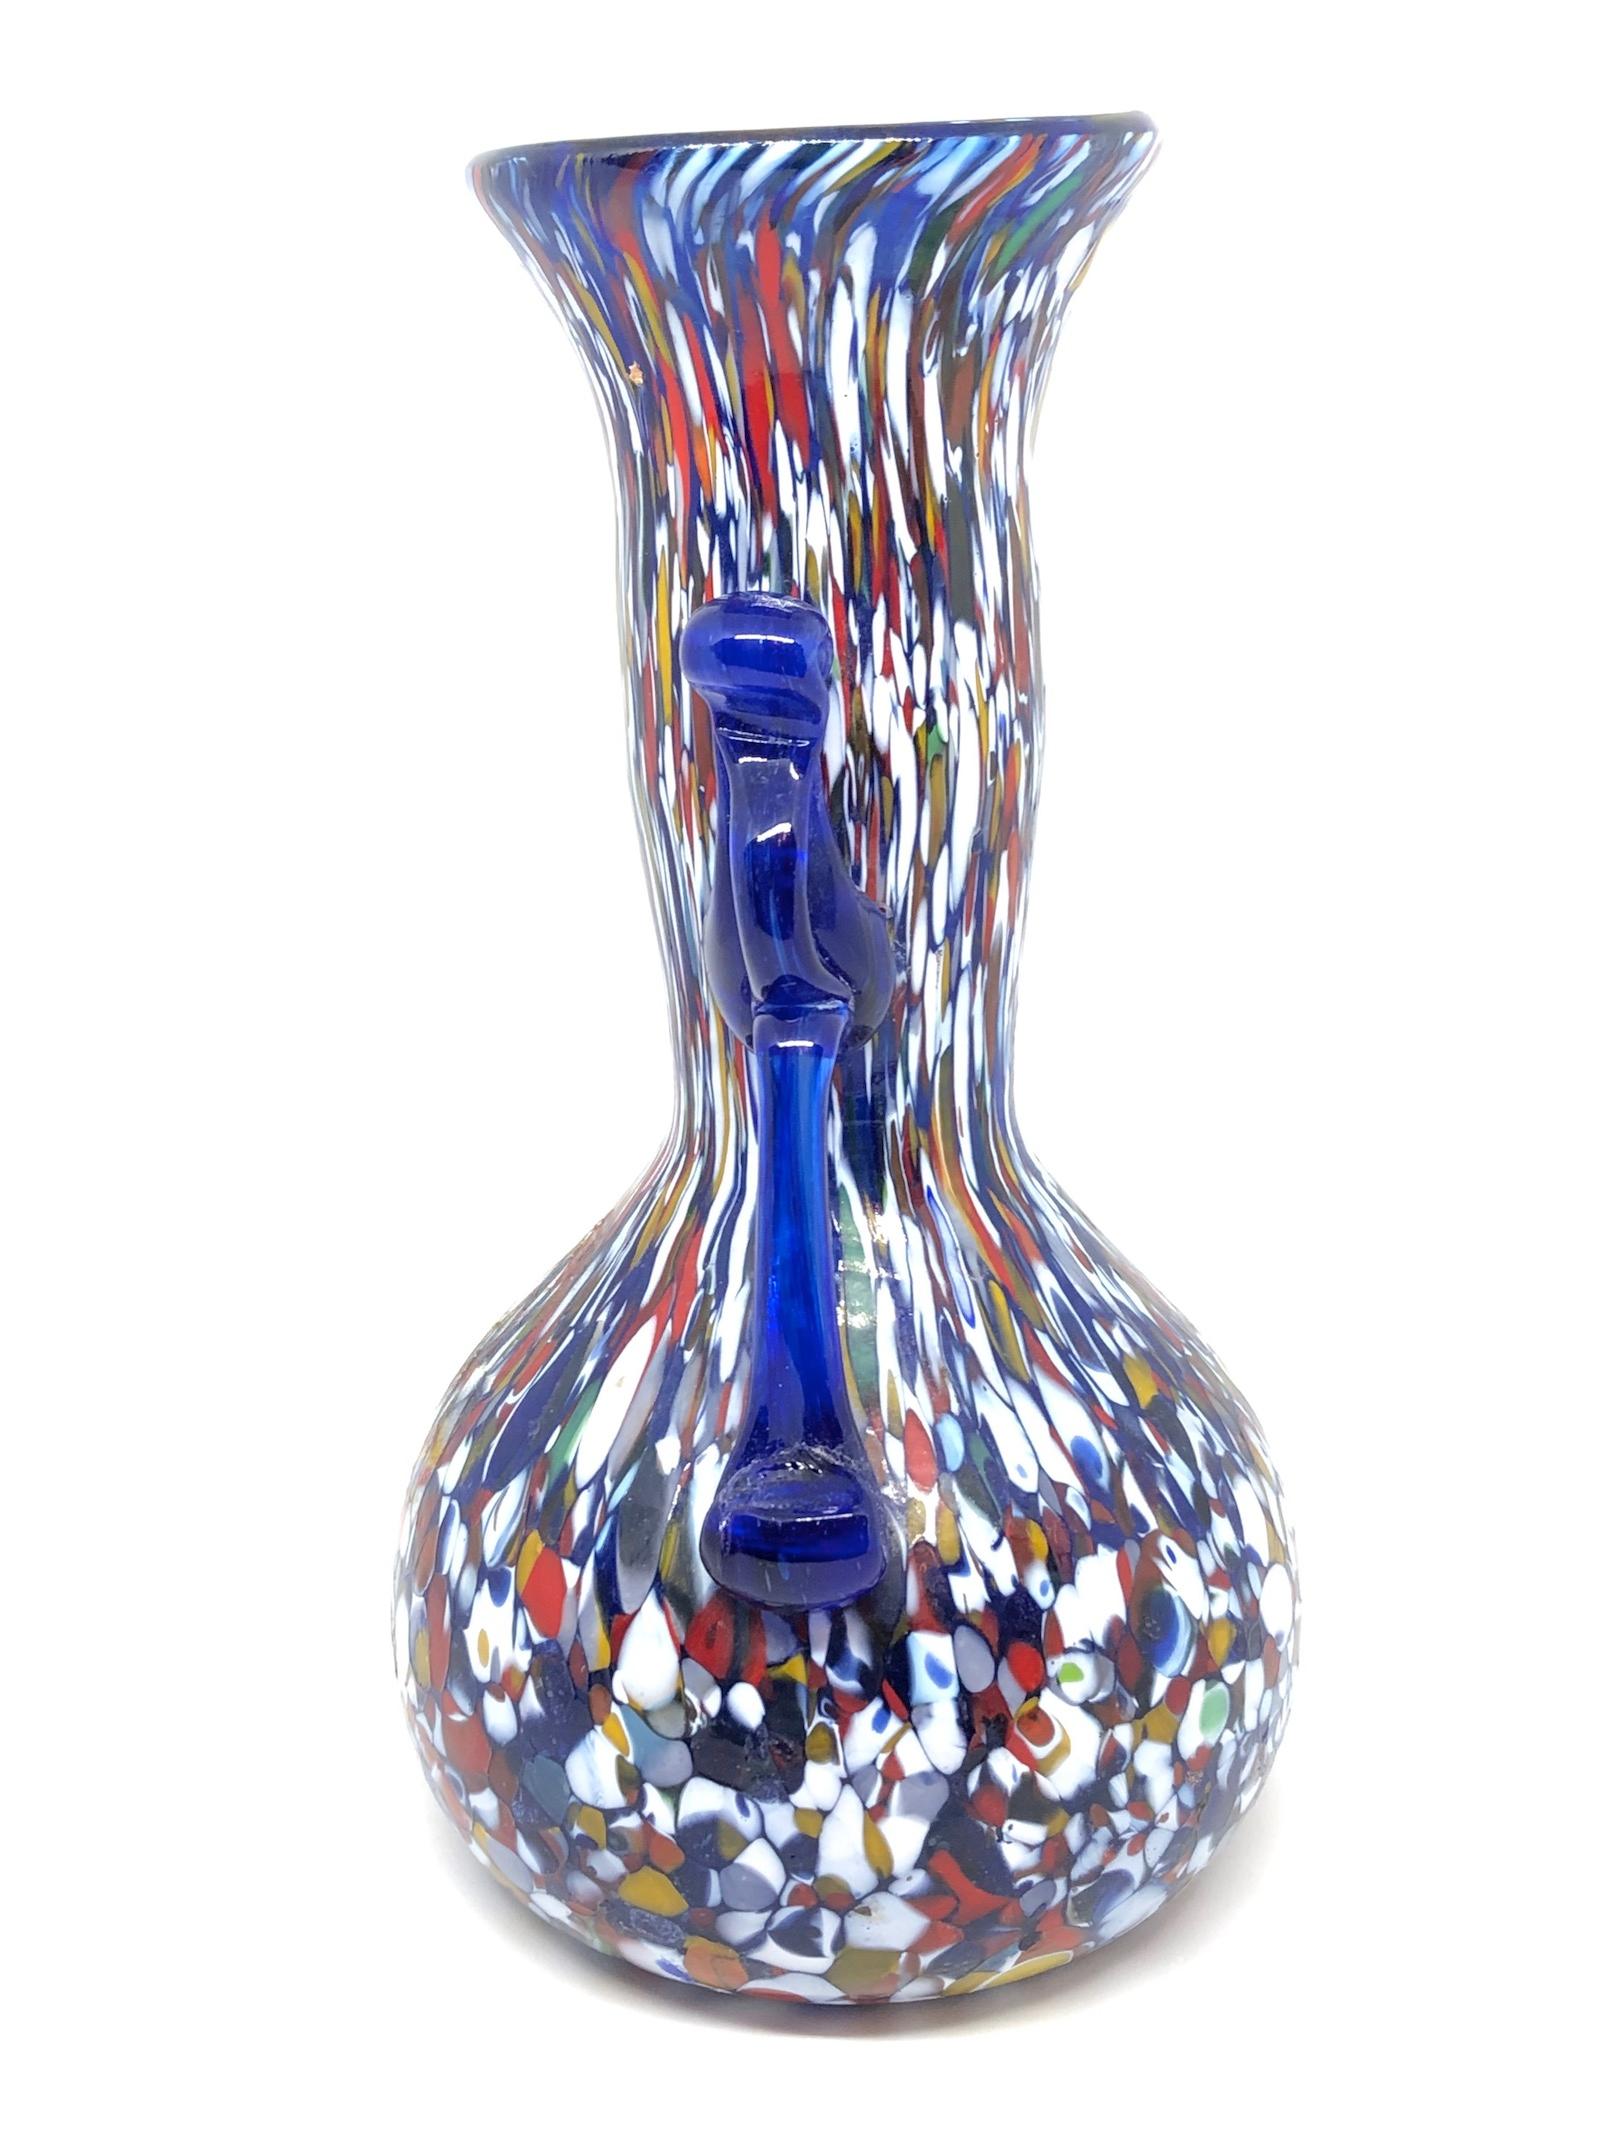 Hand-Crafted Fratelli Toso Murano Art Glass Neoclassical Urn Bud Vase, Italy, 1960s For Sale